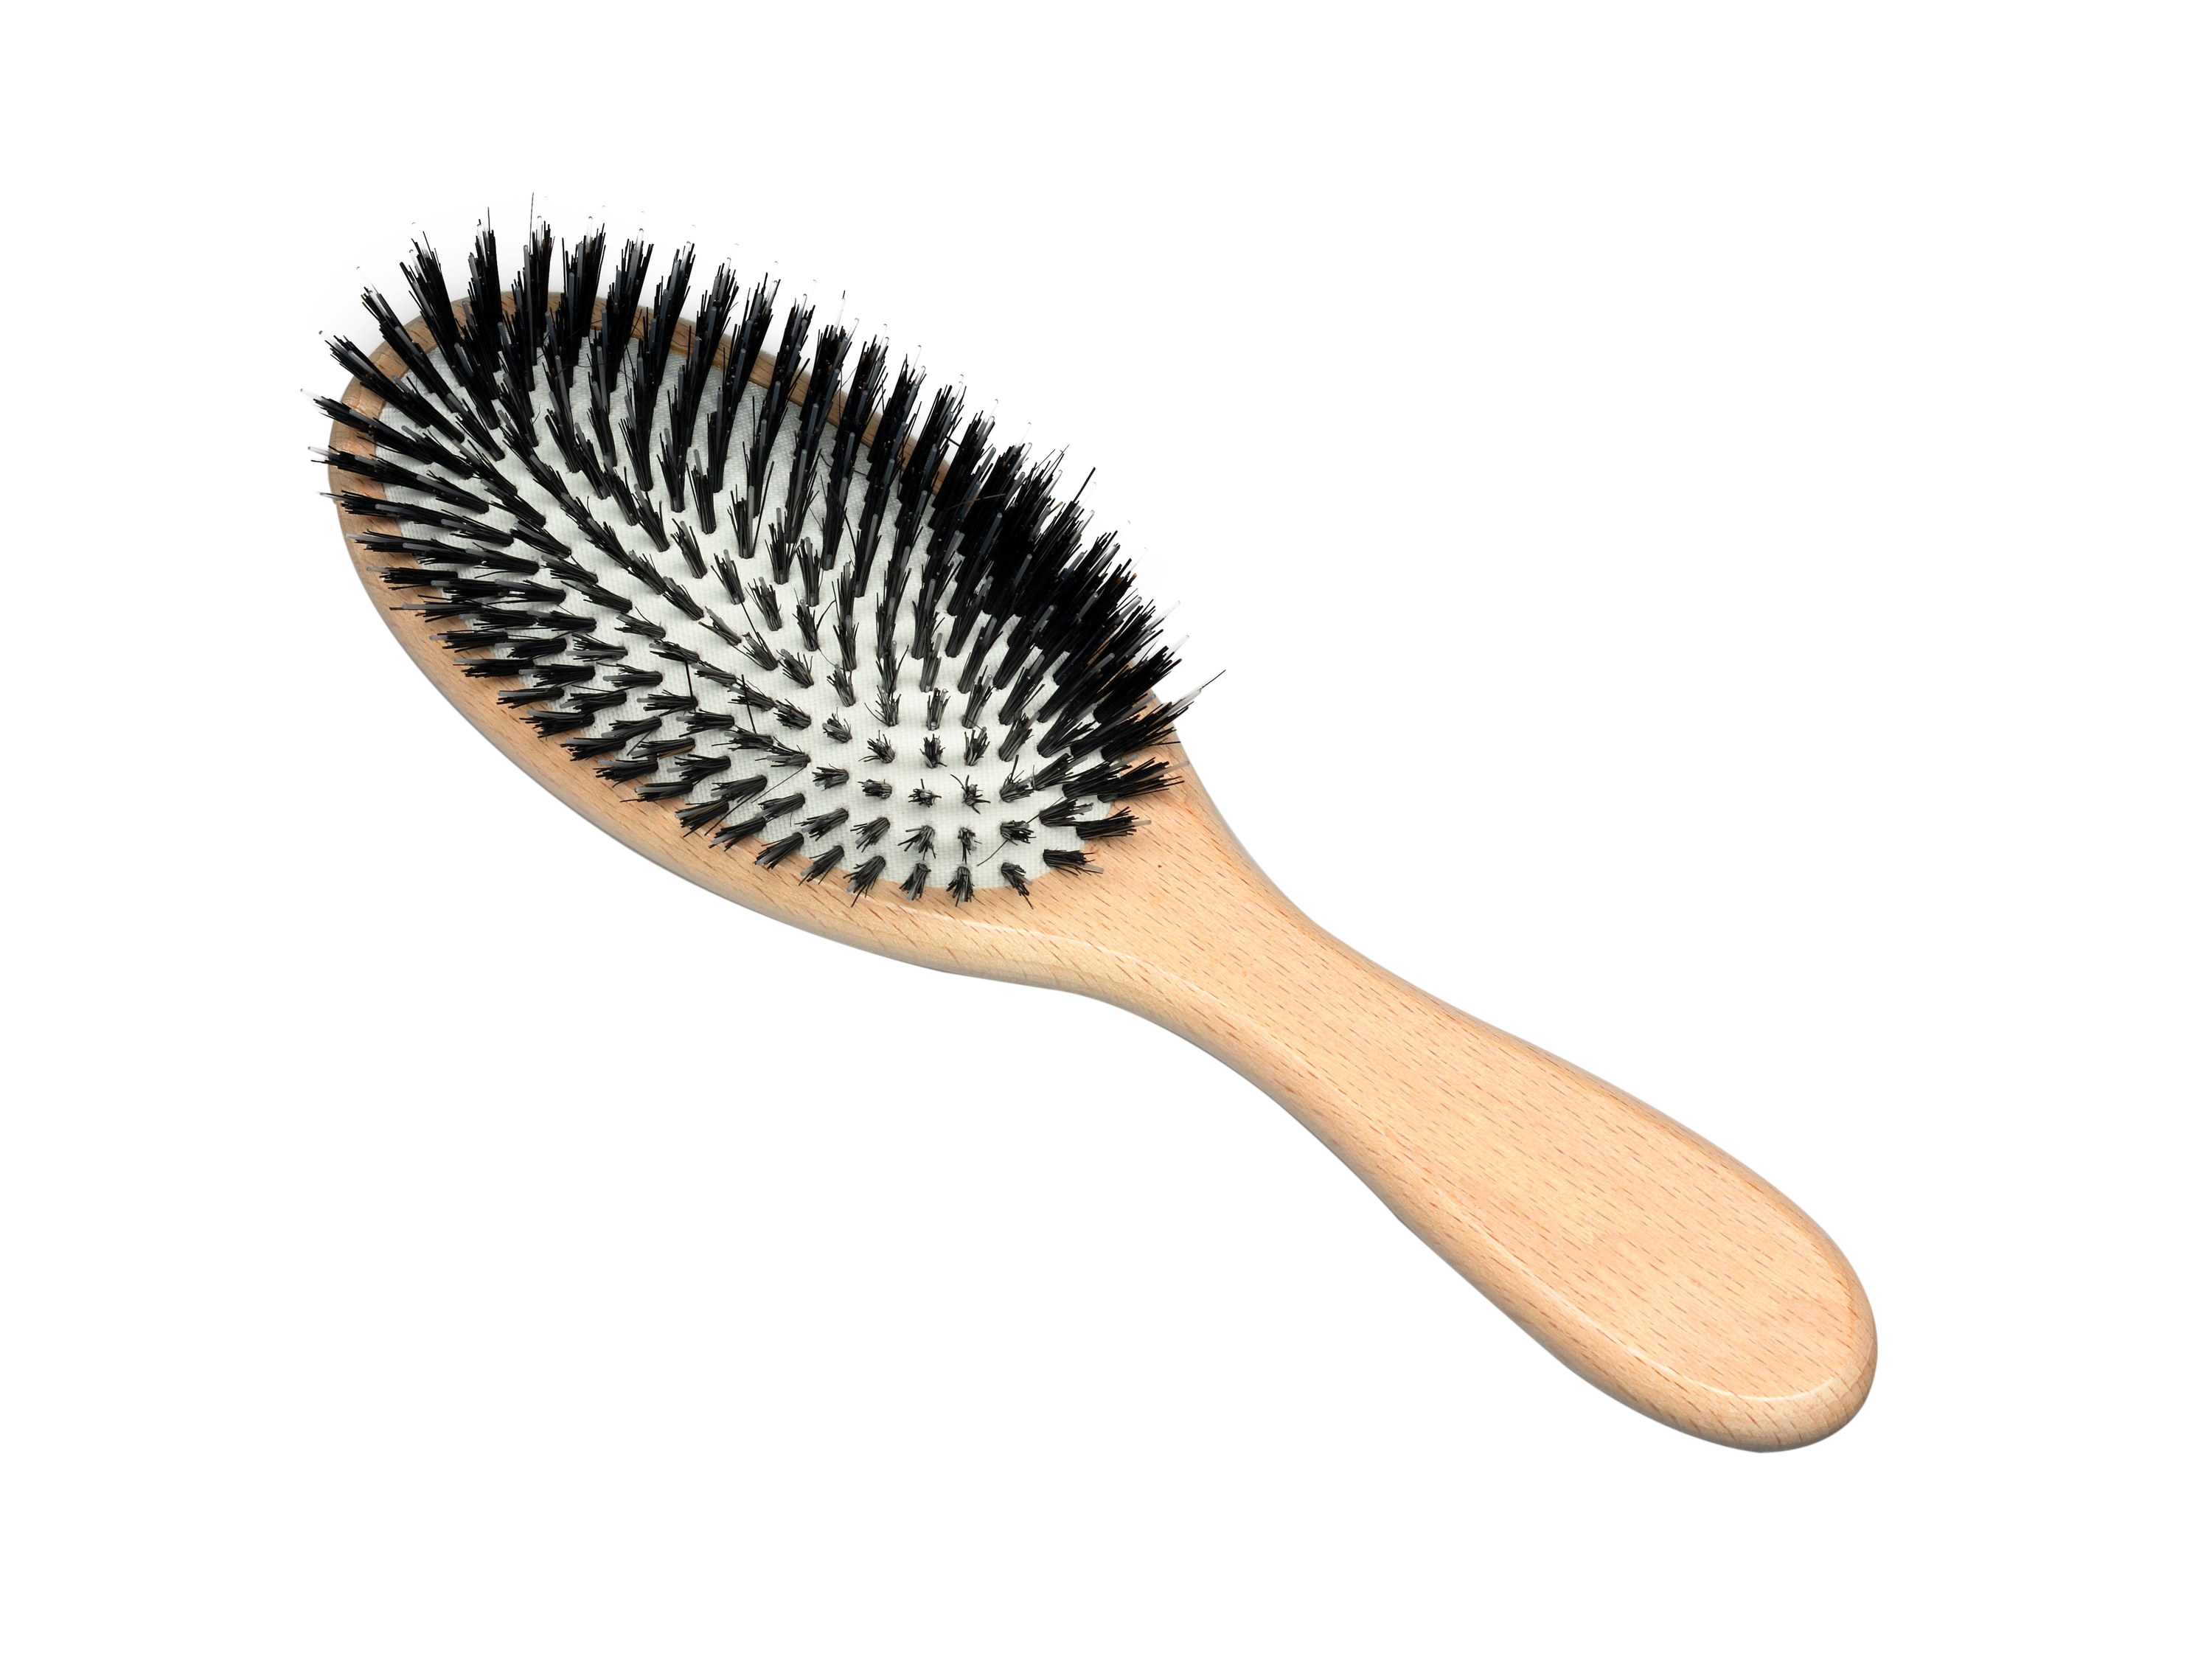 A bristle brush with a wooden handle against a white background